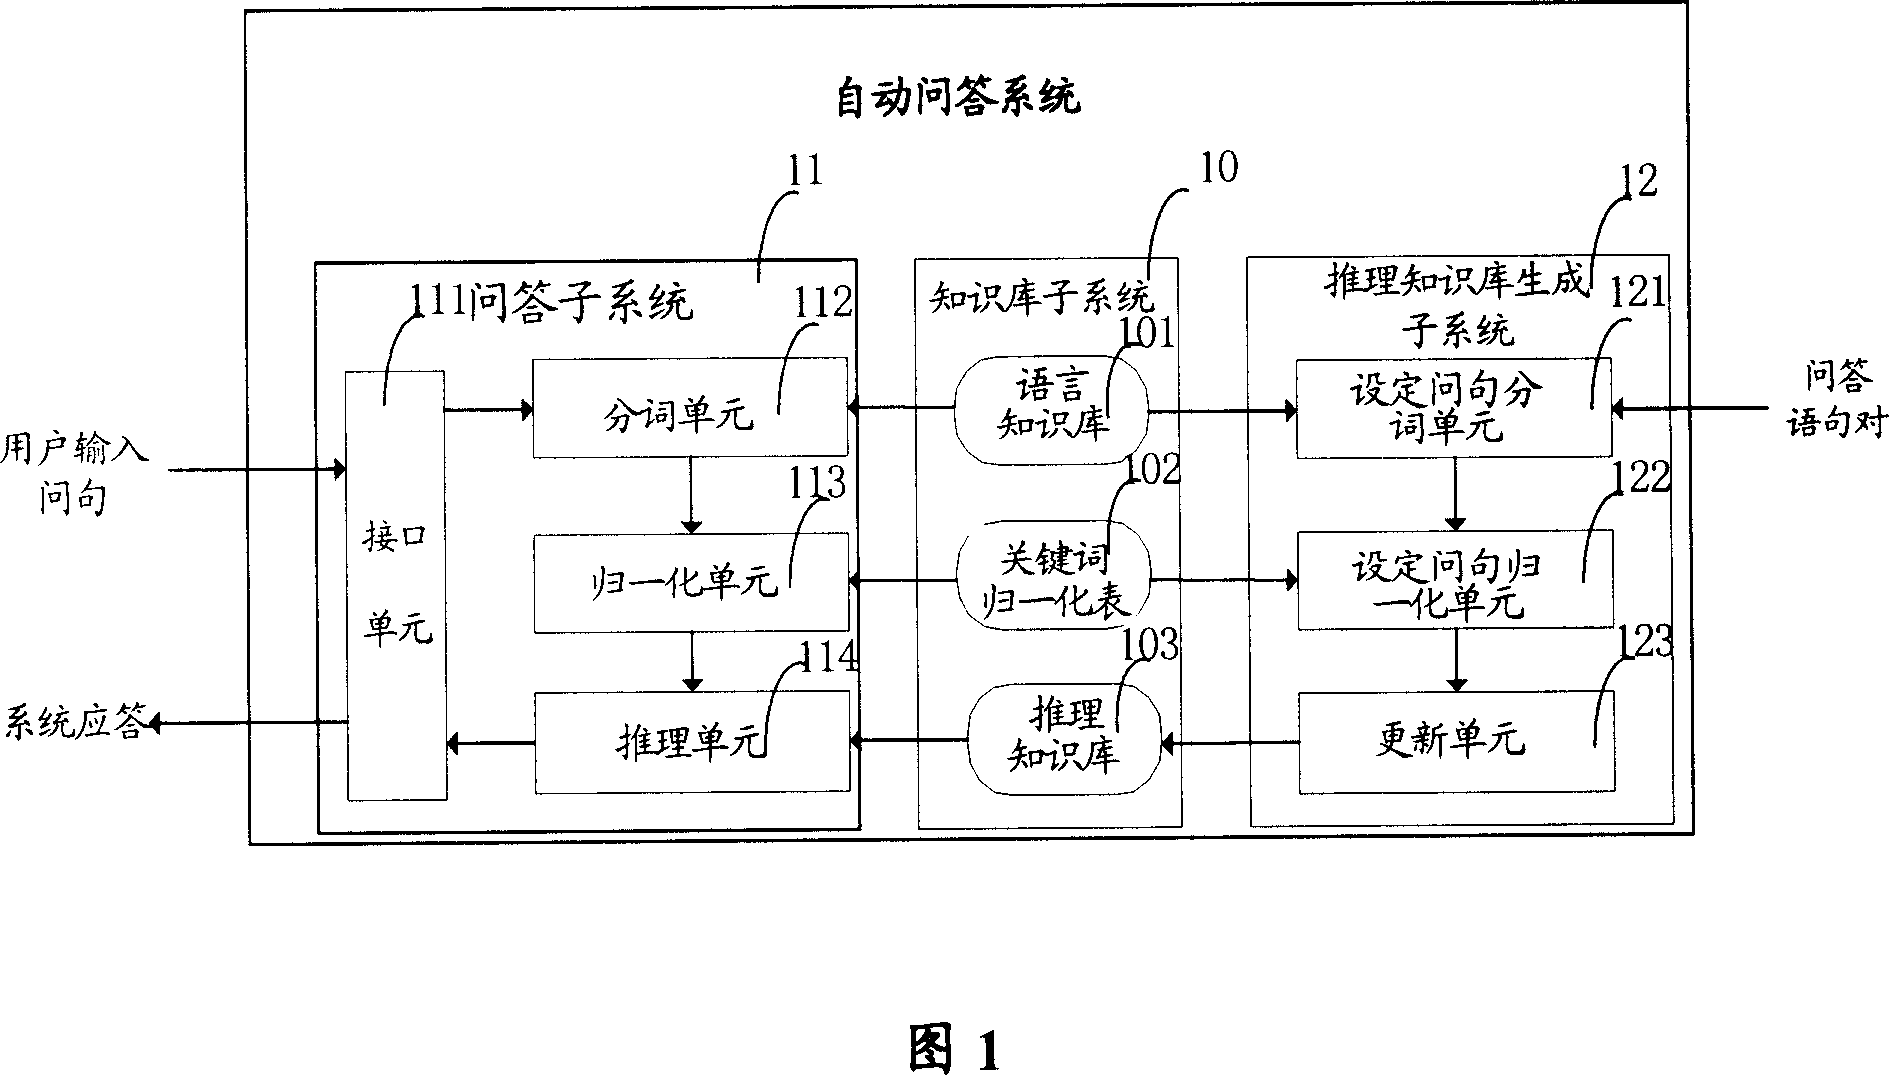 Automatically request-answering system and method